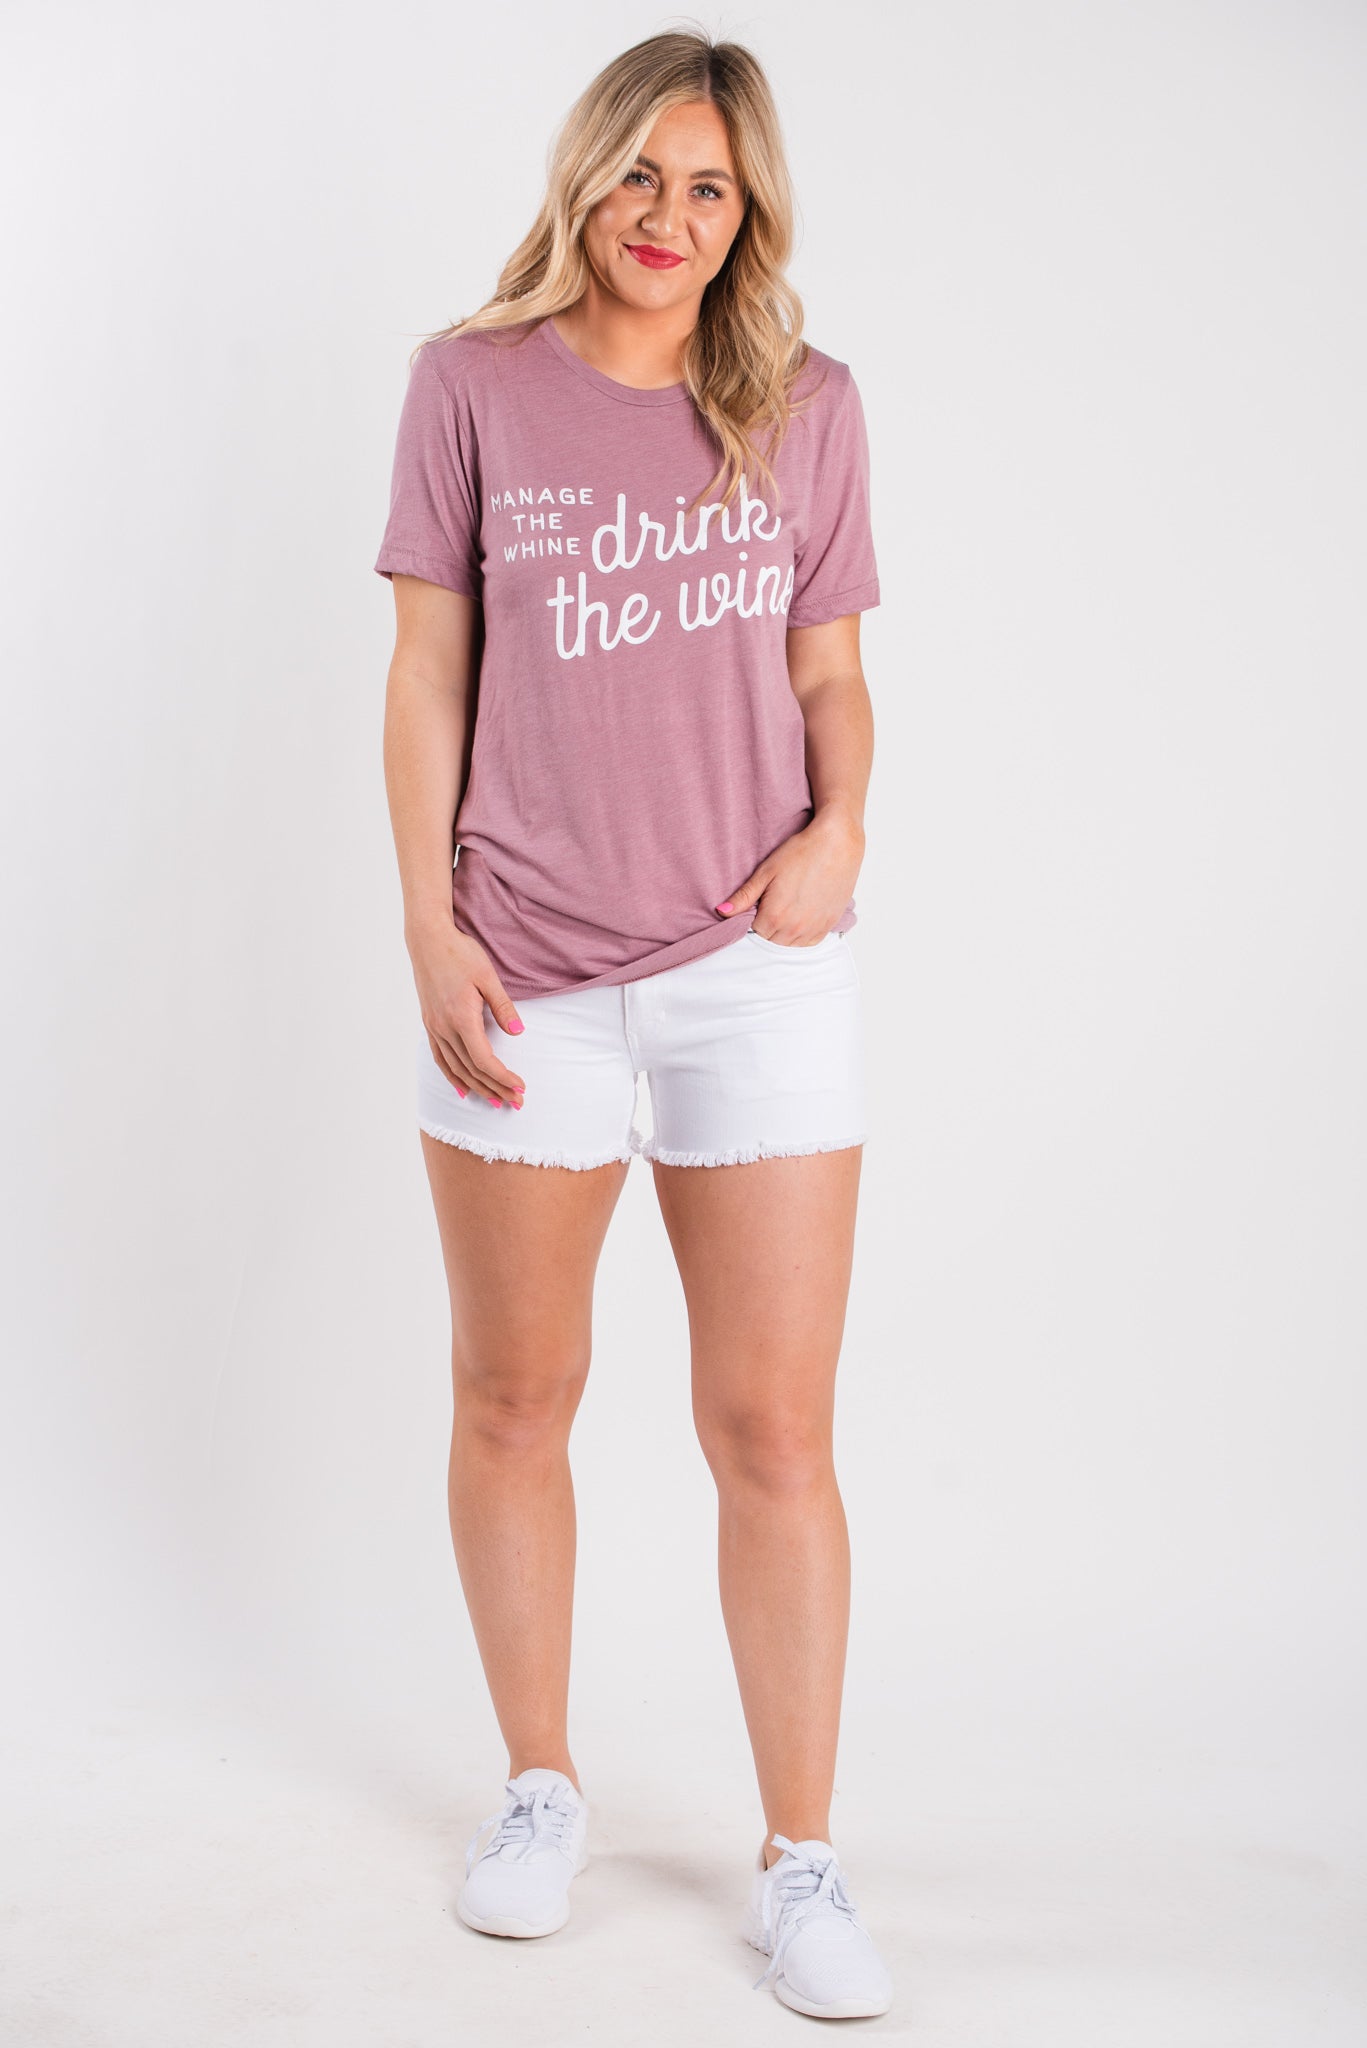 Manage the whine, drink the wine unisex short sleeve t-shirt orchid - Cute T-shirts - Funny T-Shirts at Lush Fashion Lounge Boutique in Oklahoma City